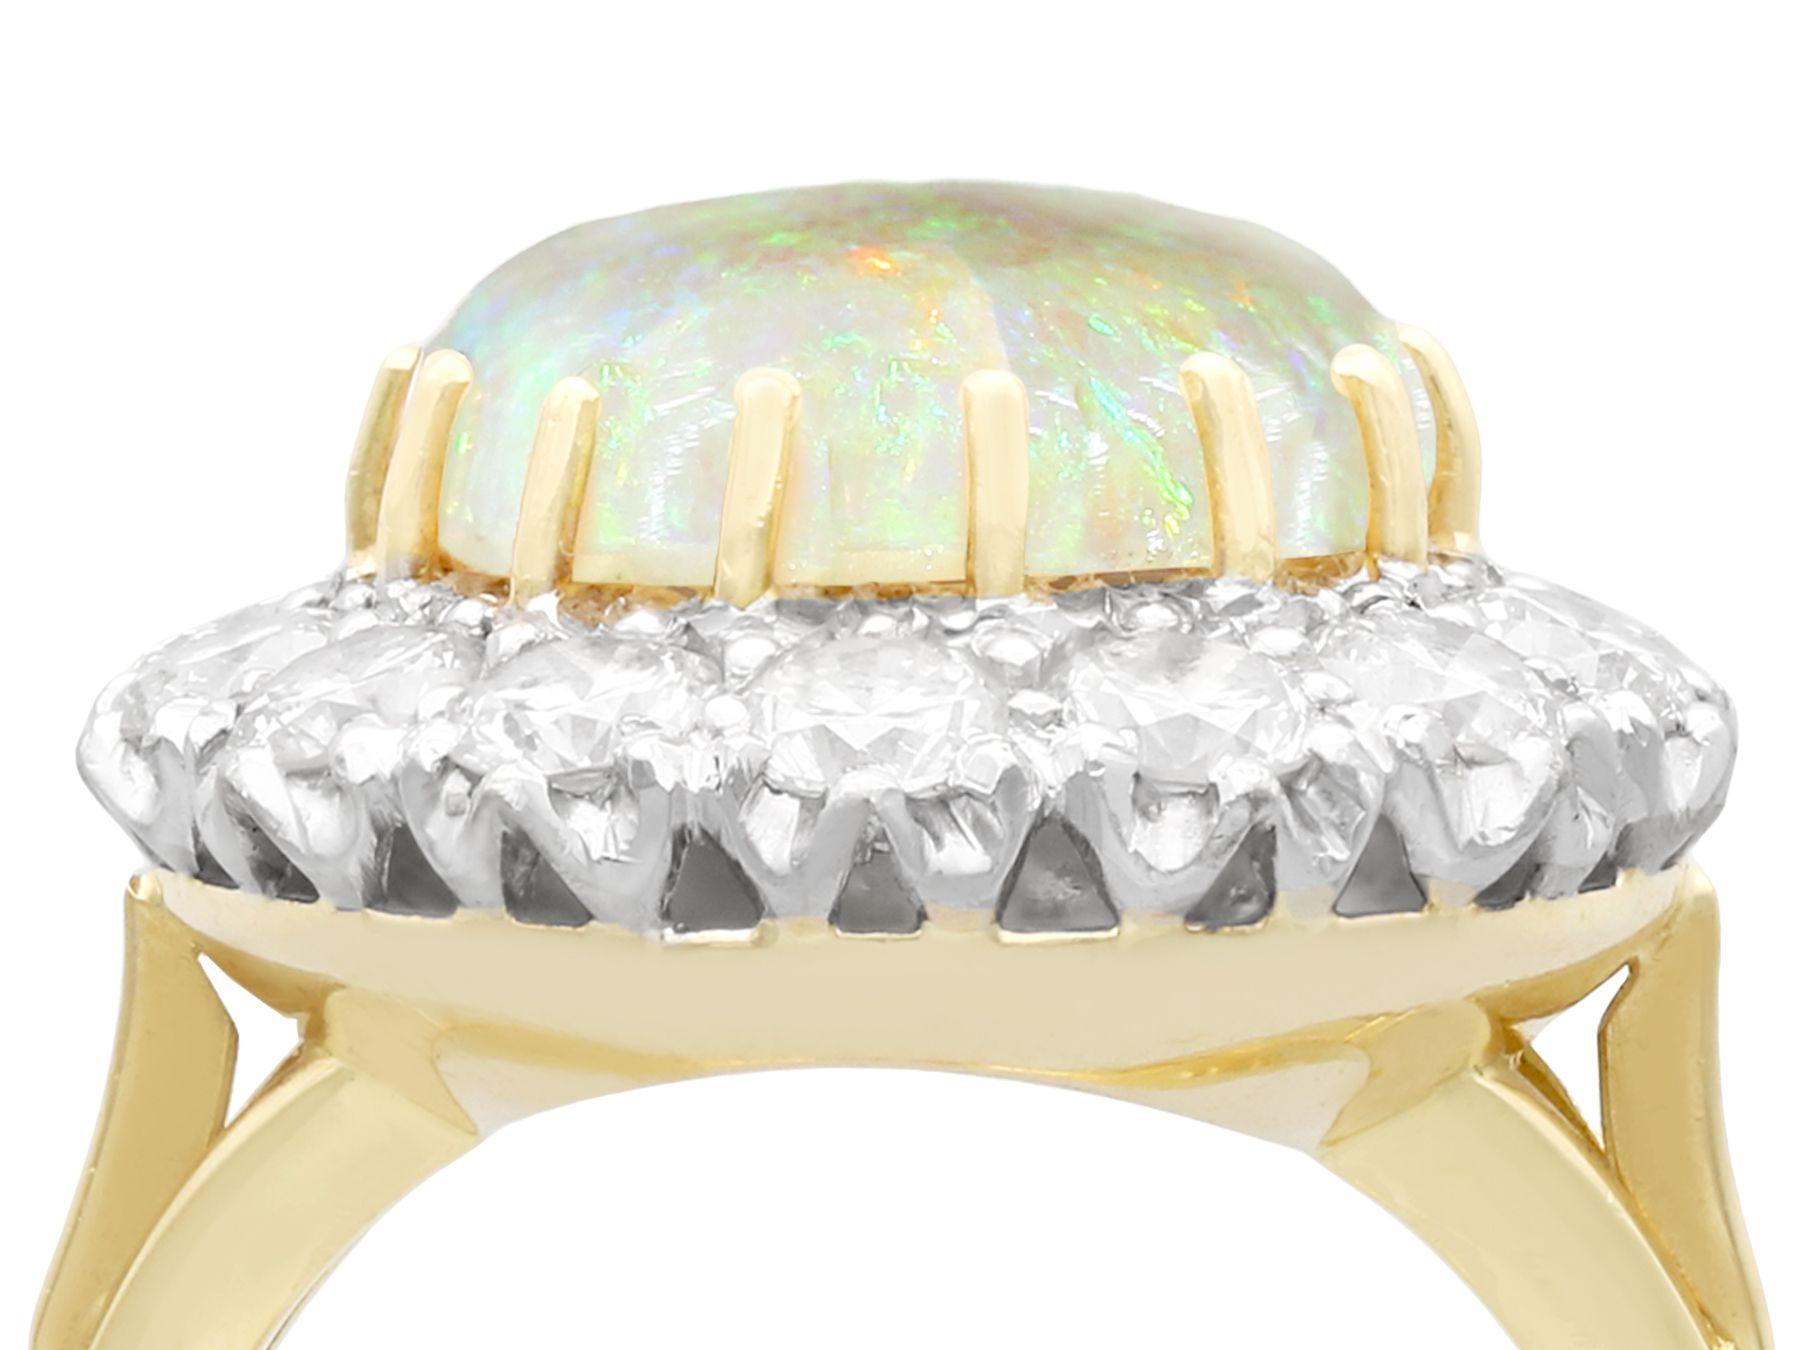 A stunning 3.55 carat white opal and 2.68 carat diamond, 18 karat yellow gold and 18 karat white gold set cocktail ring; part of our diverse opal jewelry collection.

This stunning, fine and impressive cabochon cut opal and diamond cluster ring has